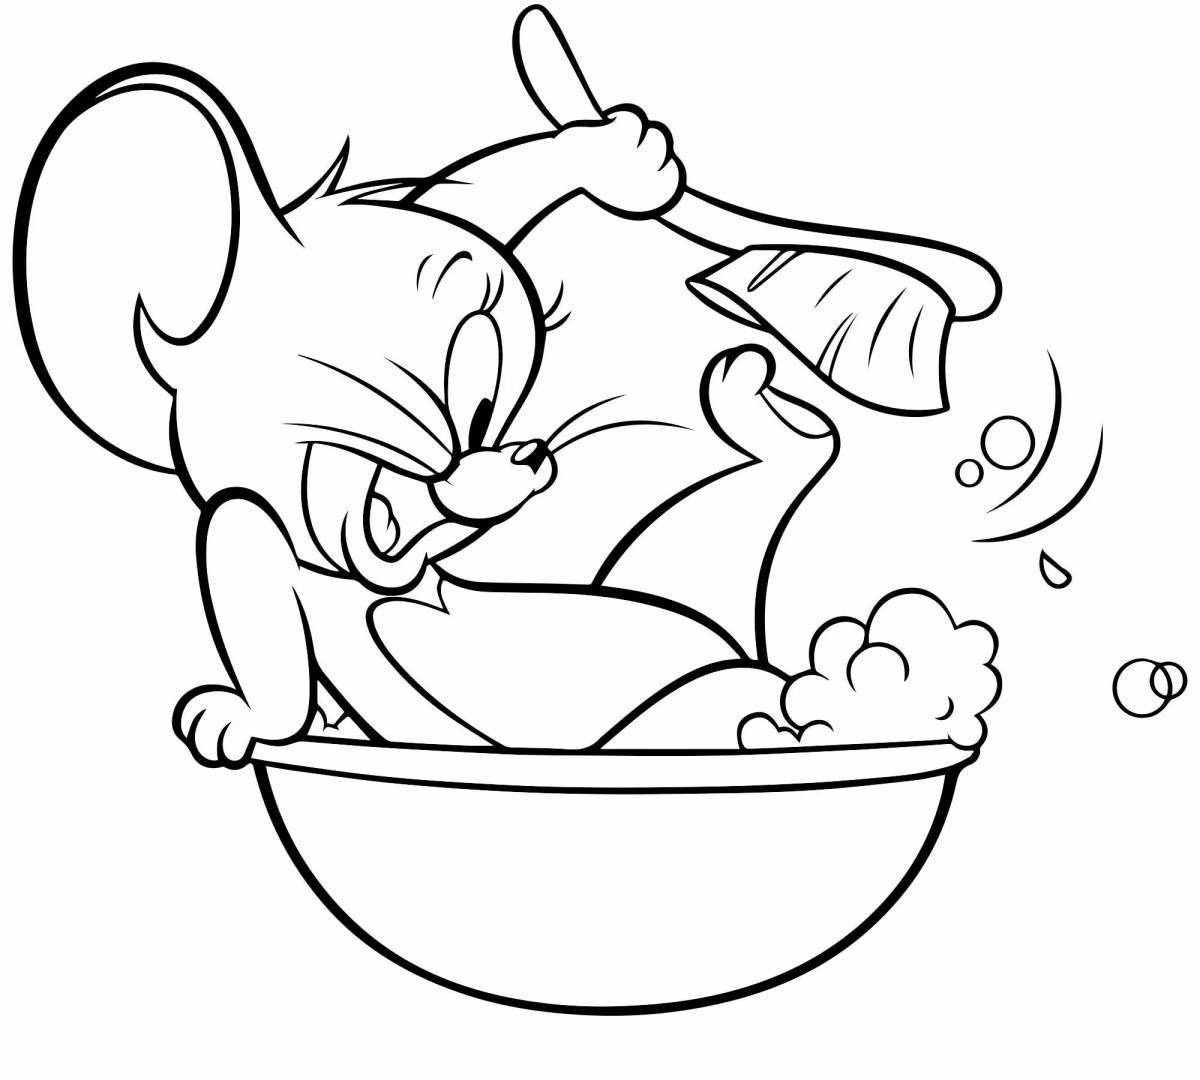 Joyful tom and jerry coloring book